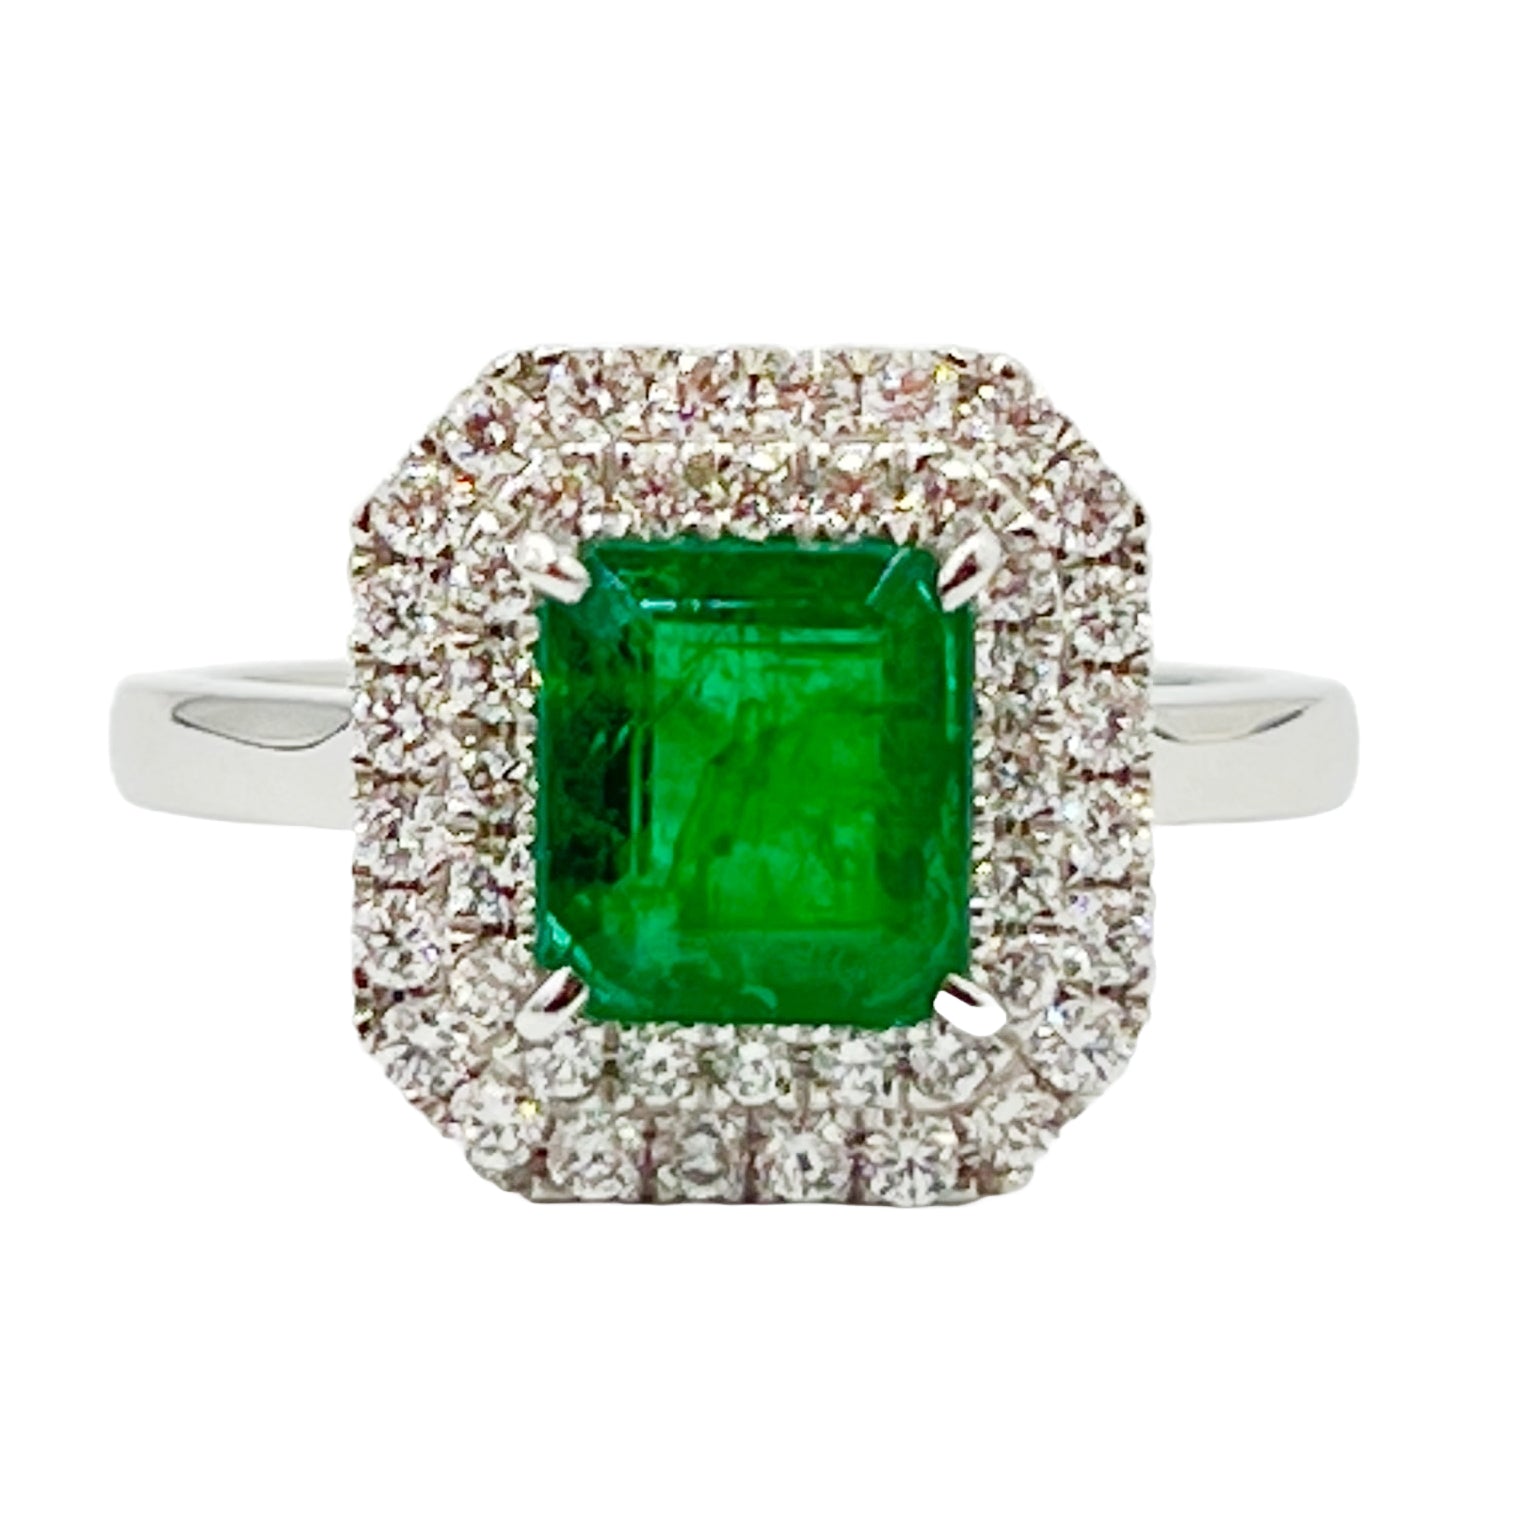 Ring 18KW/4.2G 1EMER-1.52CT 44RD-0.49CT